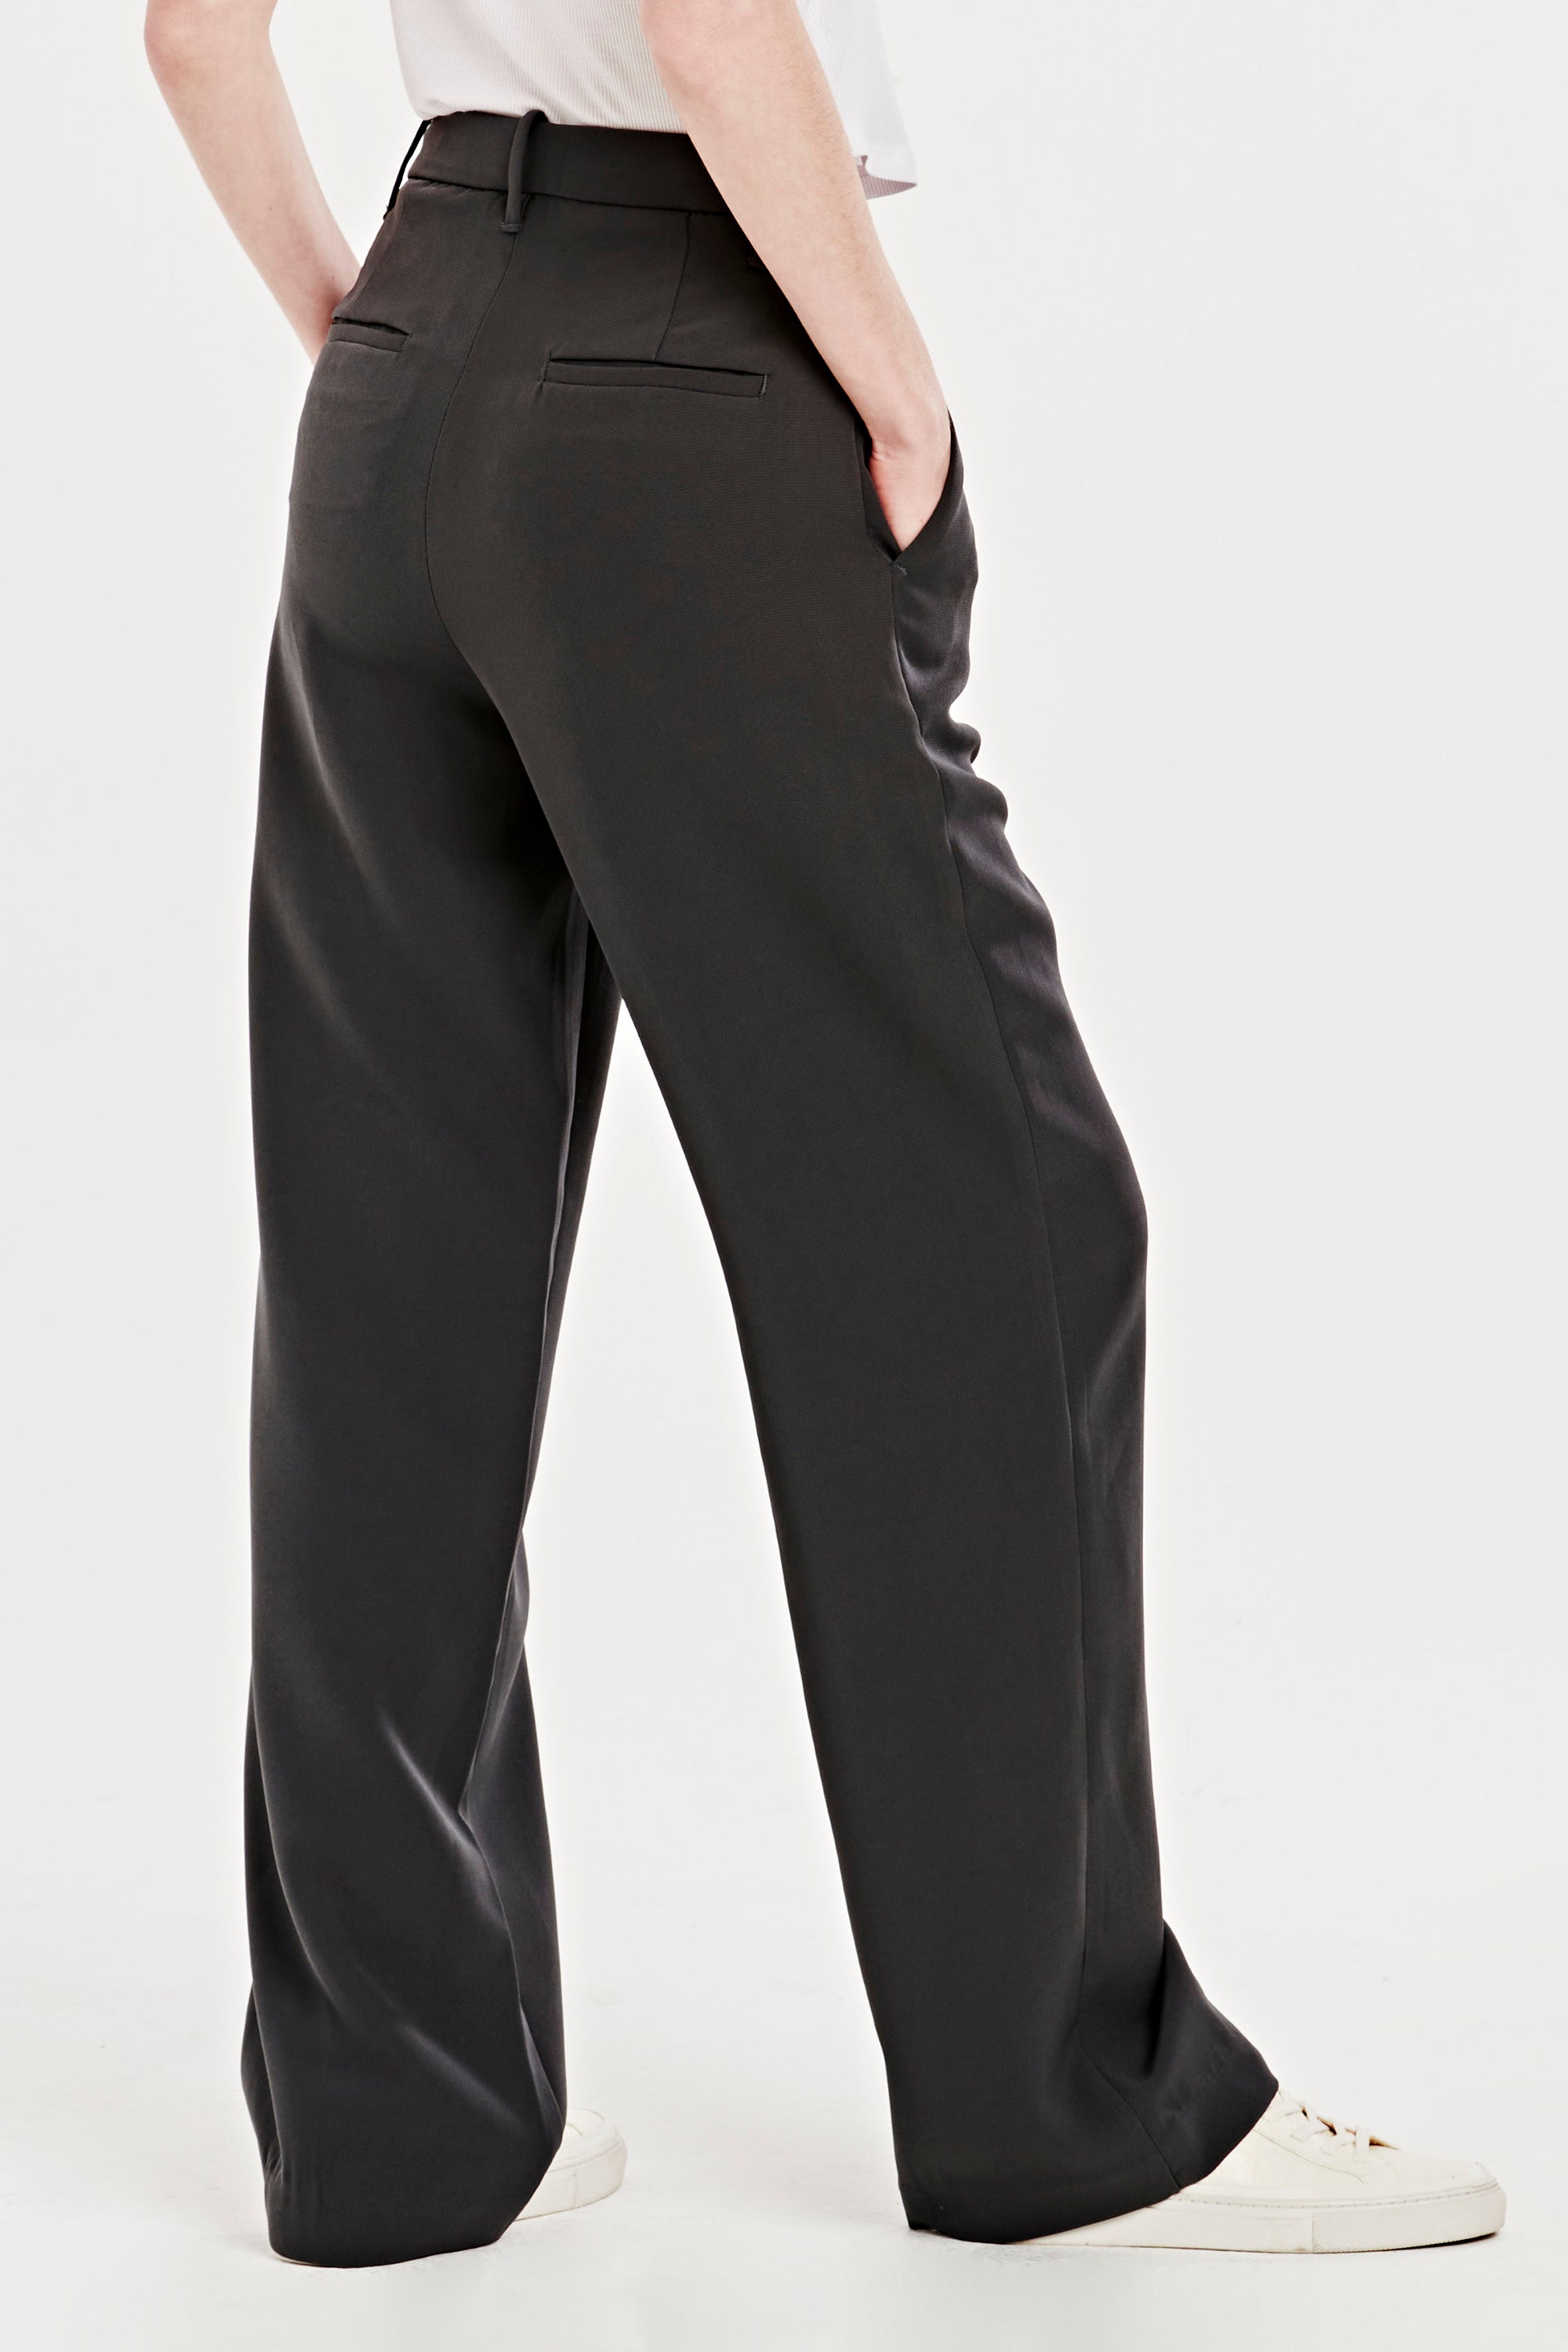 adelaide-high-rise-wide-leg-pant-charcoal